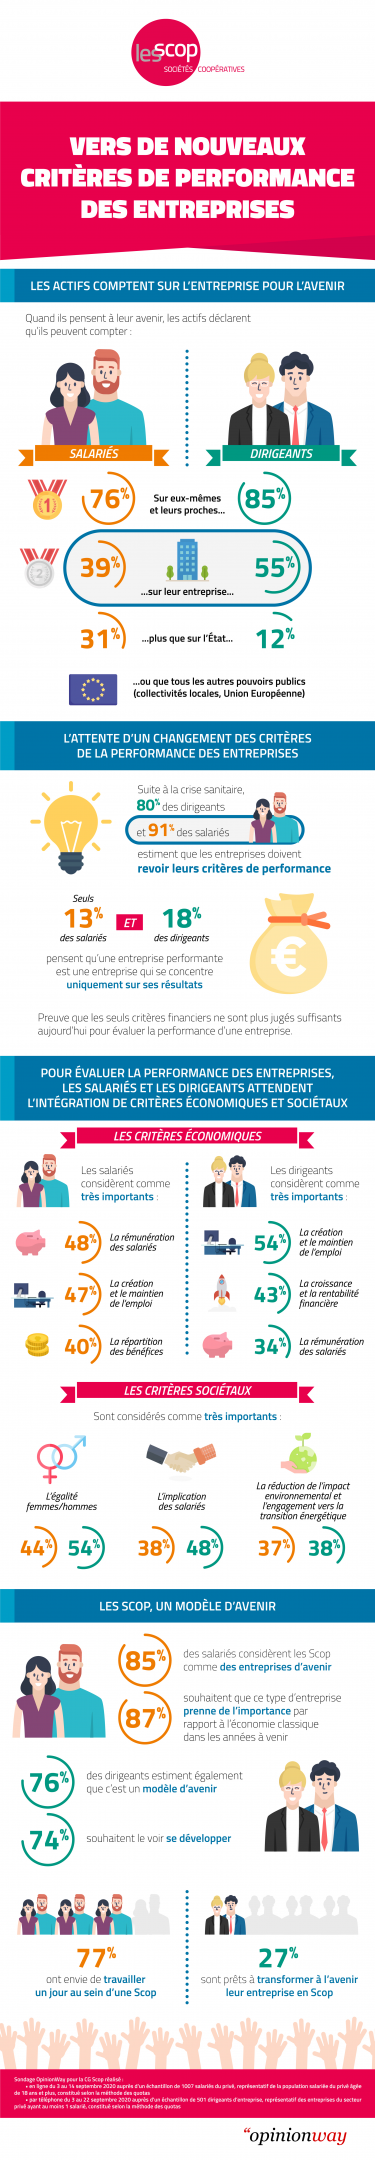 infographie-OpinionWay-CGScop